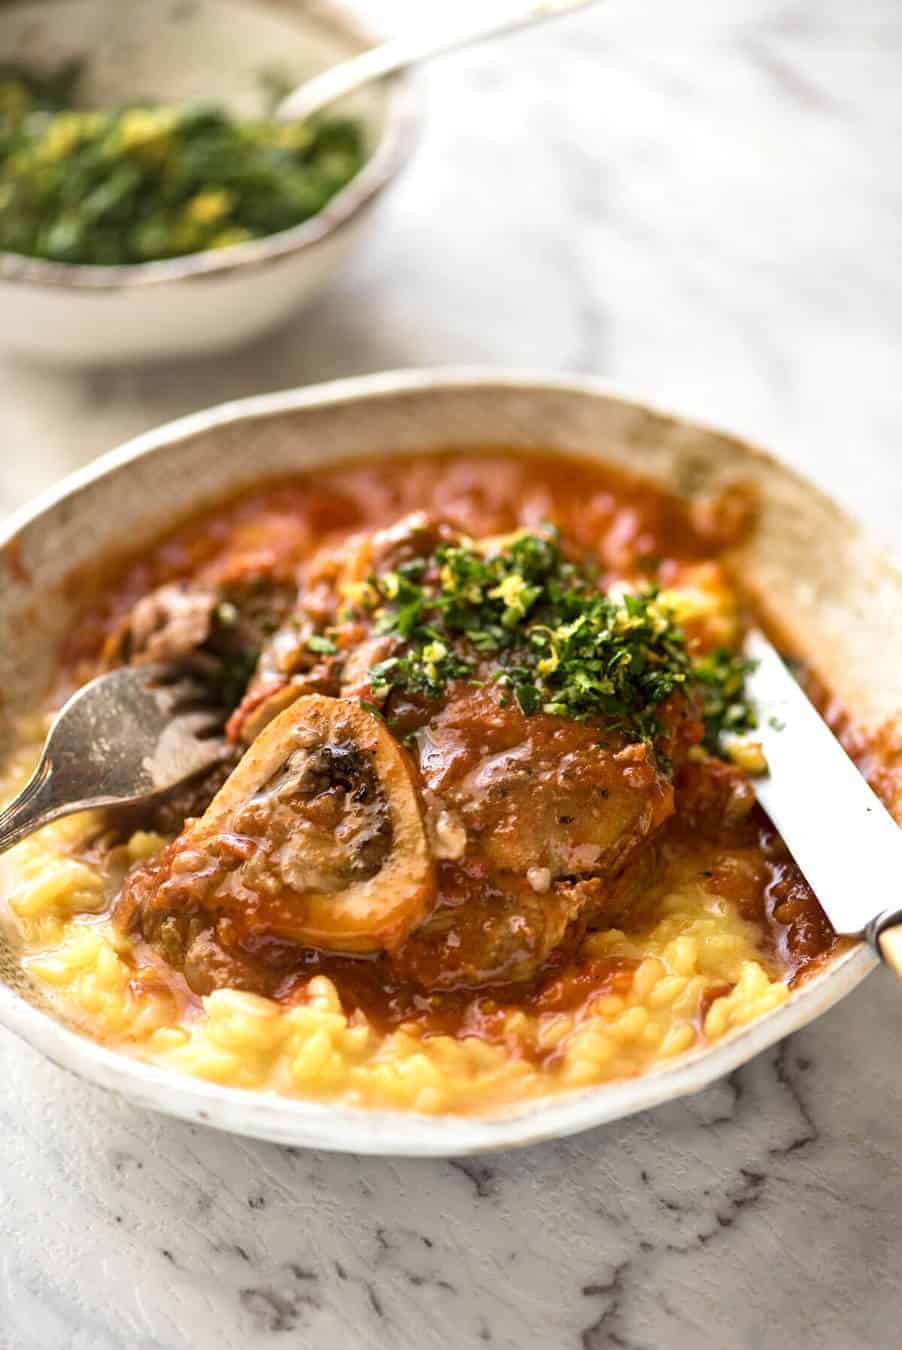 Fork tender veal braised in a rich red sauce, Osso Buco is a meal fit for a king! www.recipetineats.com